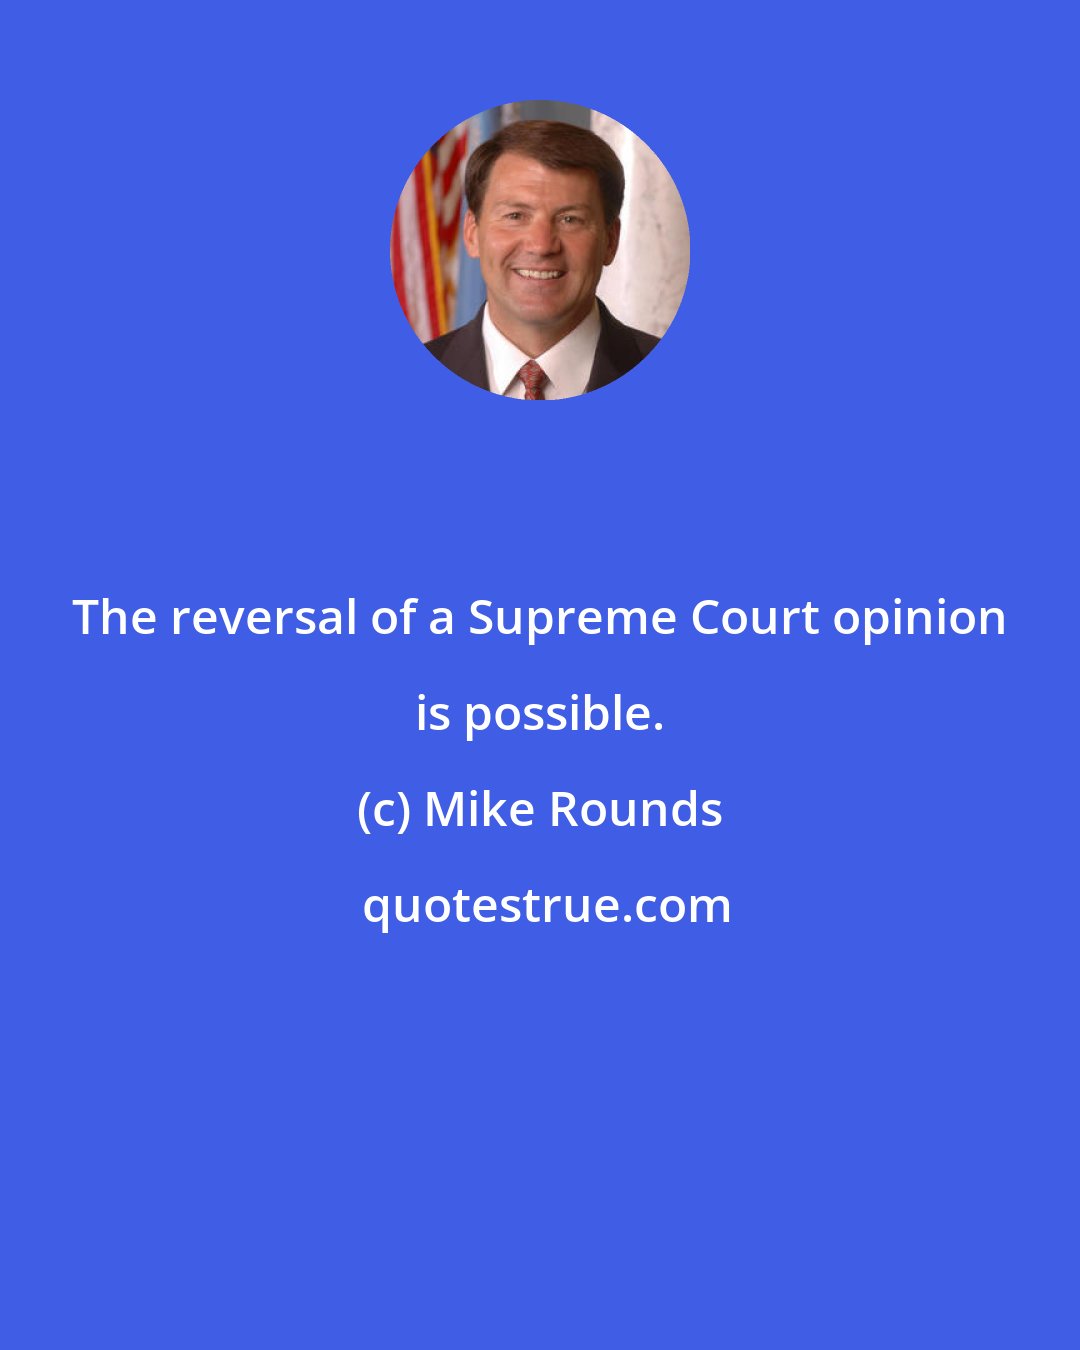 Mike Rounds: The reversal of a Supreme Court opinion is possible.